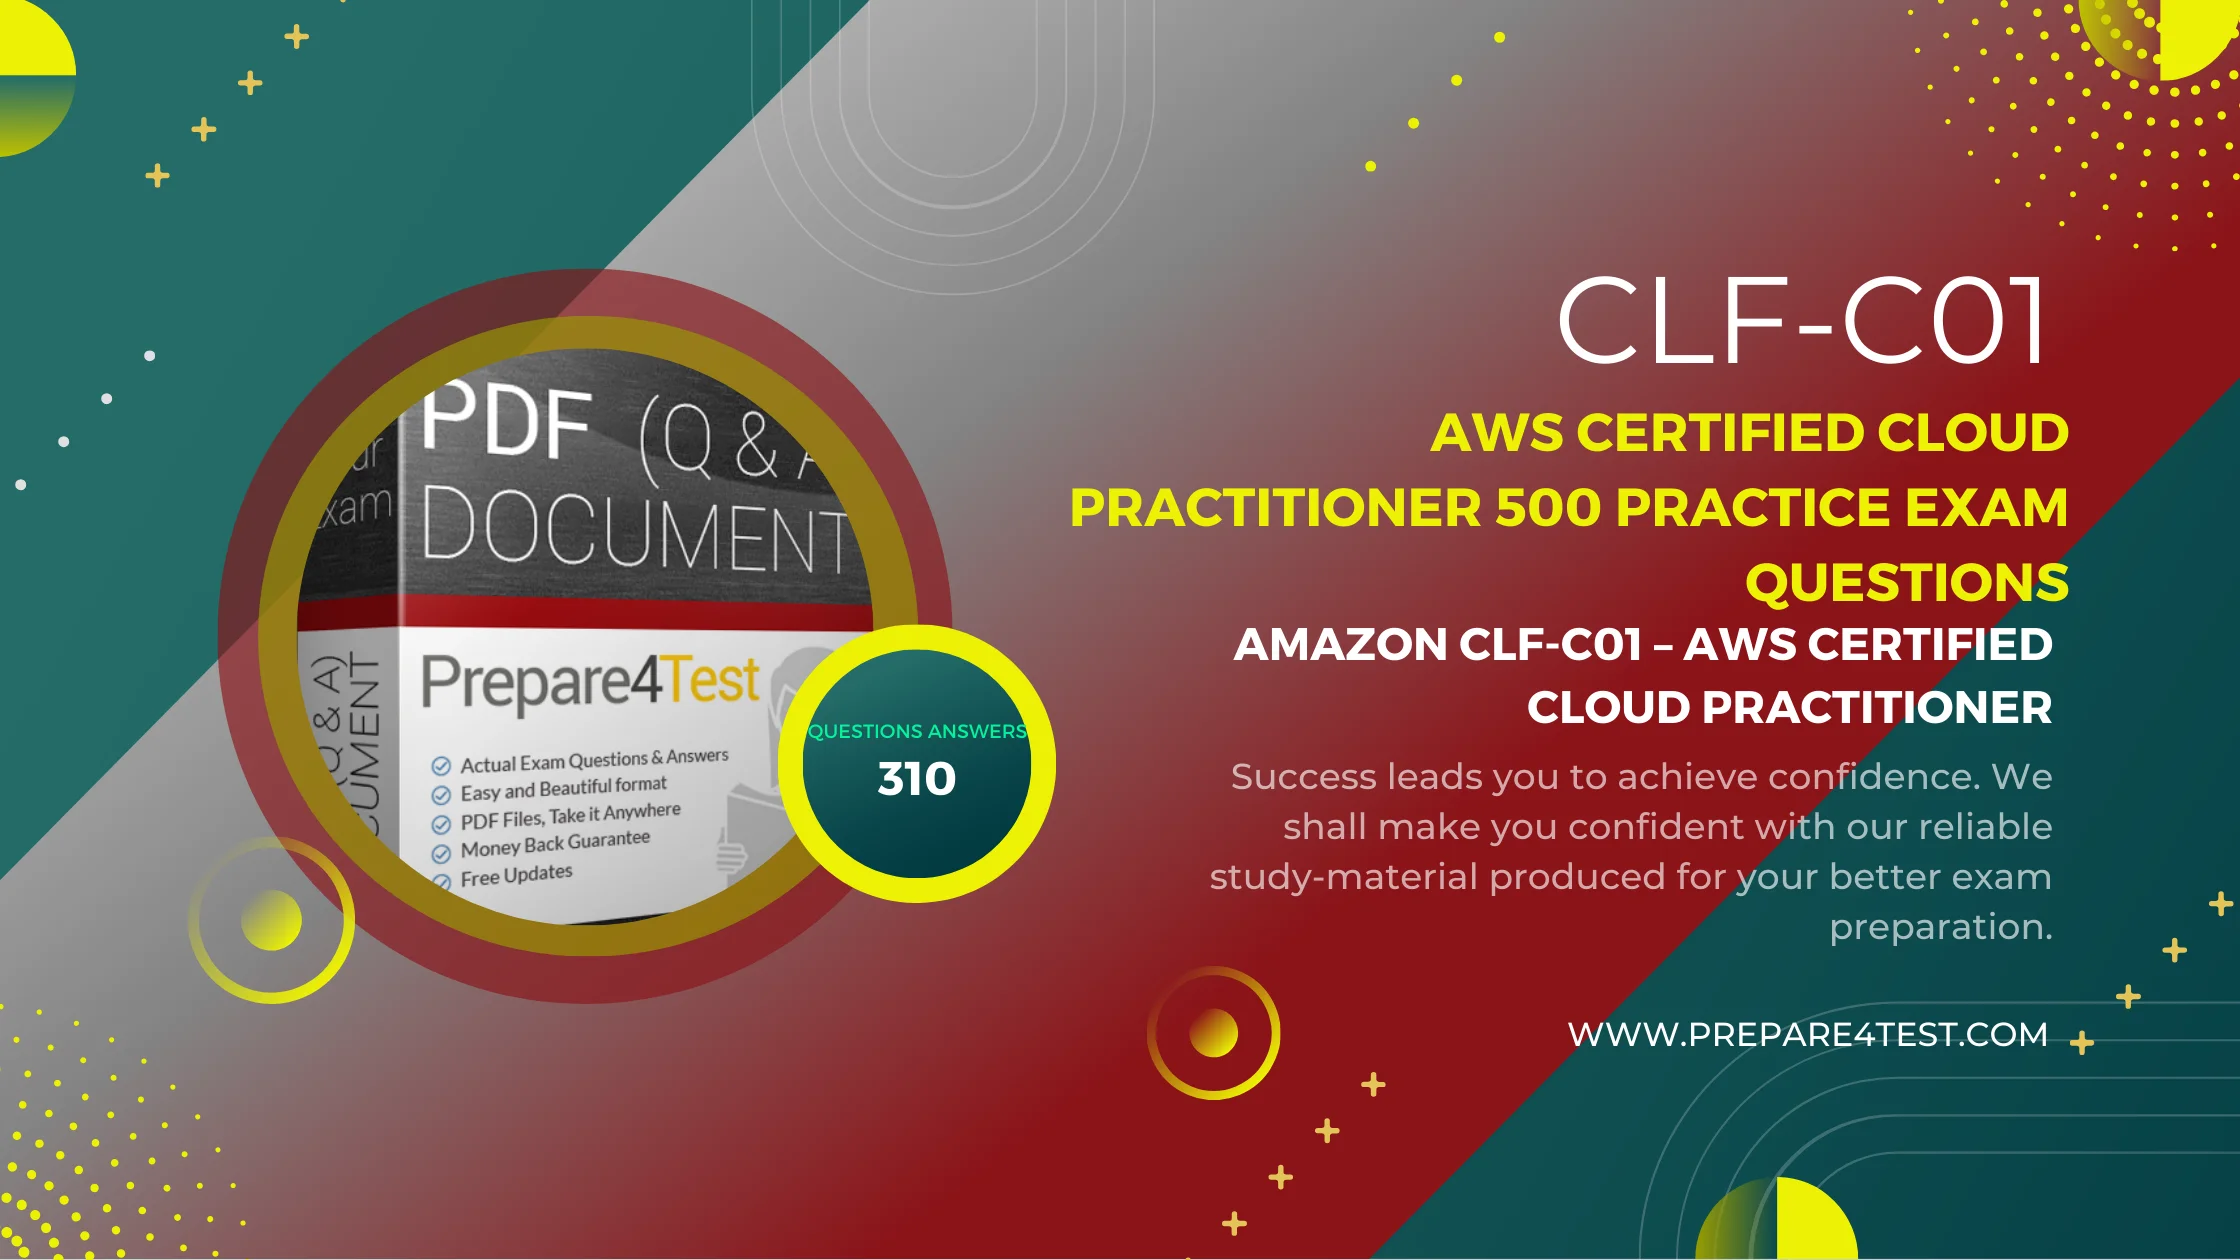 AWS Certified Cloud Practitioner 500 Practice Exam Questions from where to get guides